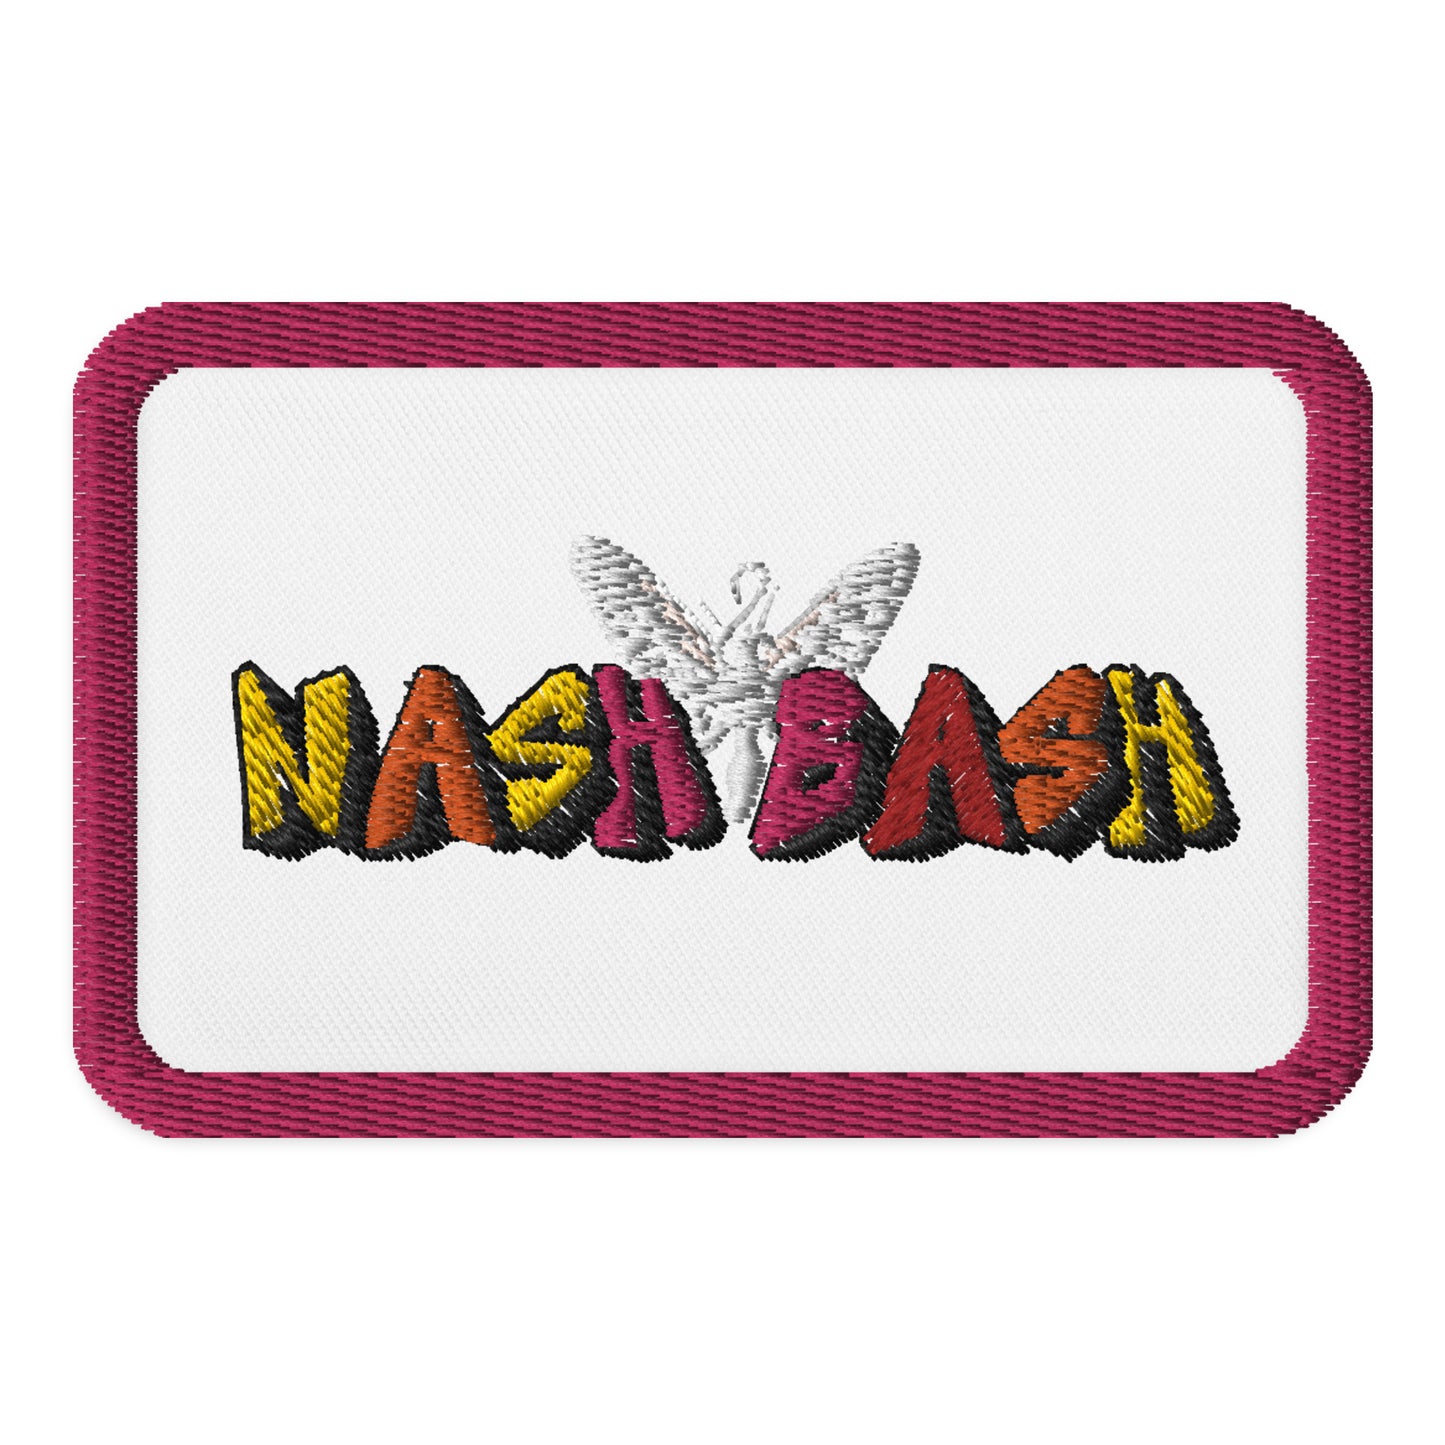 Nash Bash Embroidered Patch - [FEB 24'}